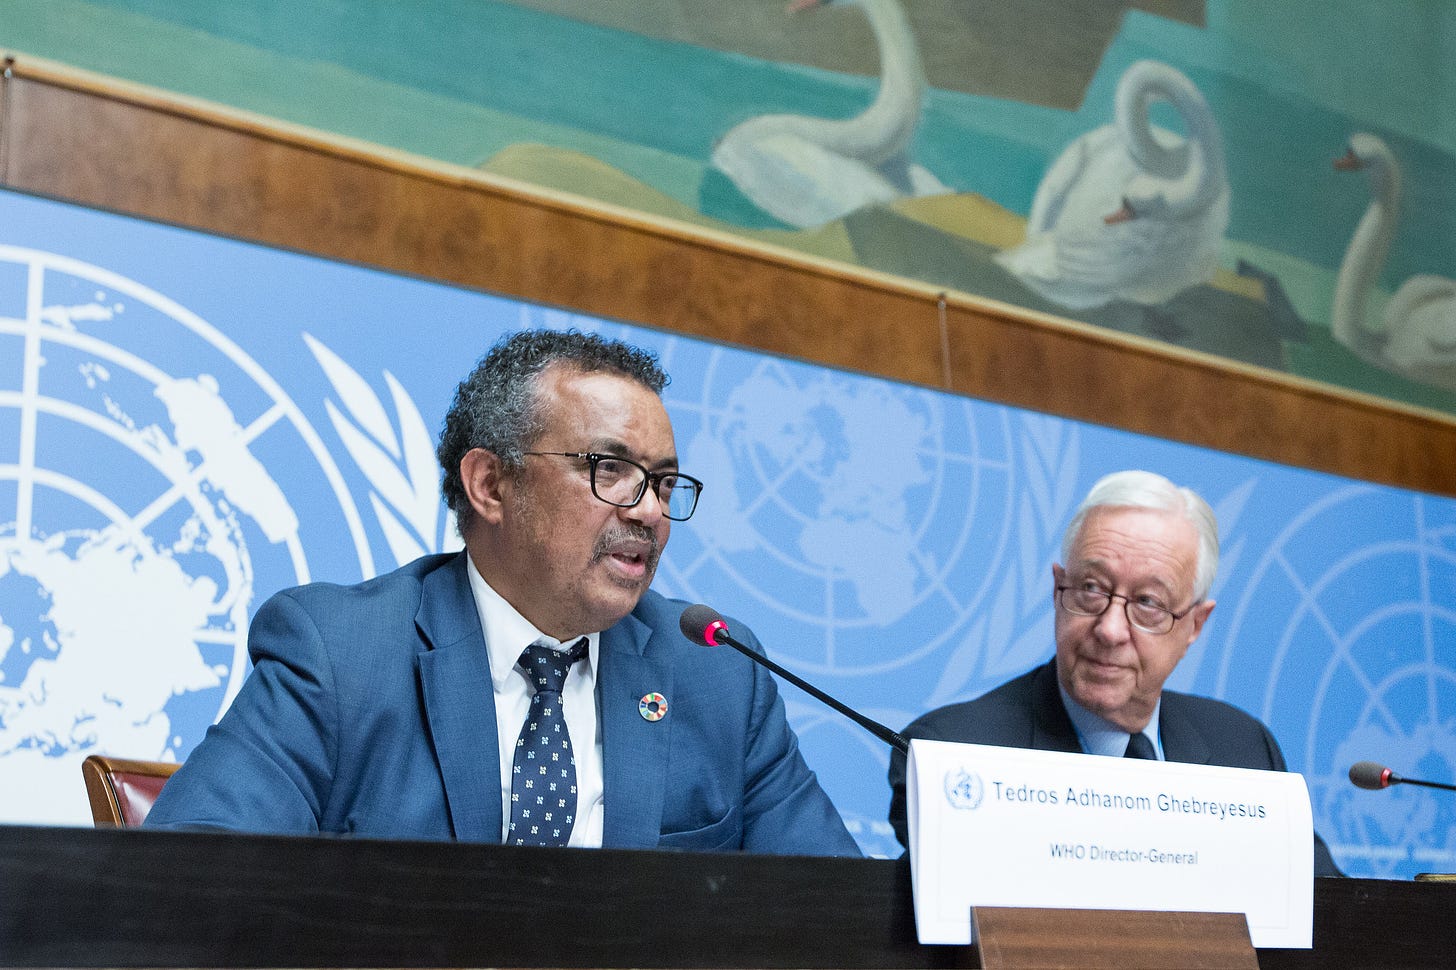 The head of the World Health Organization Dr. Tedros Adhanom speaking into a lit microphone at the UN office in front of a blue and white banner with the WHO logo in a repeating pattern